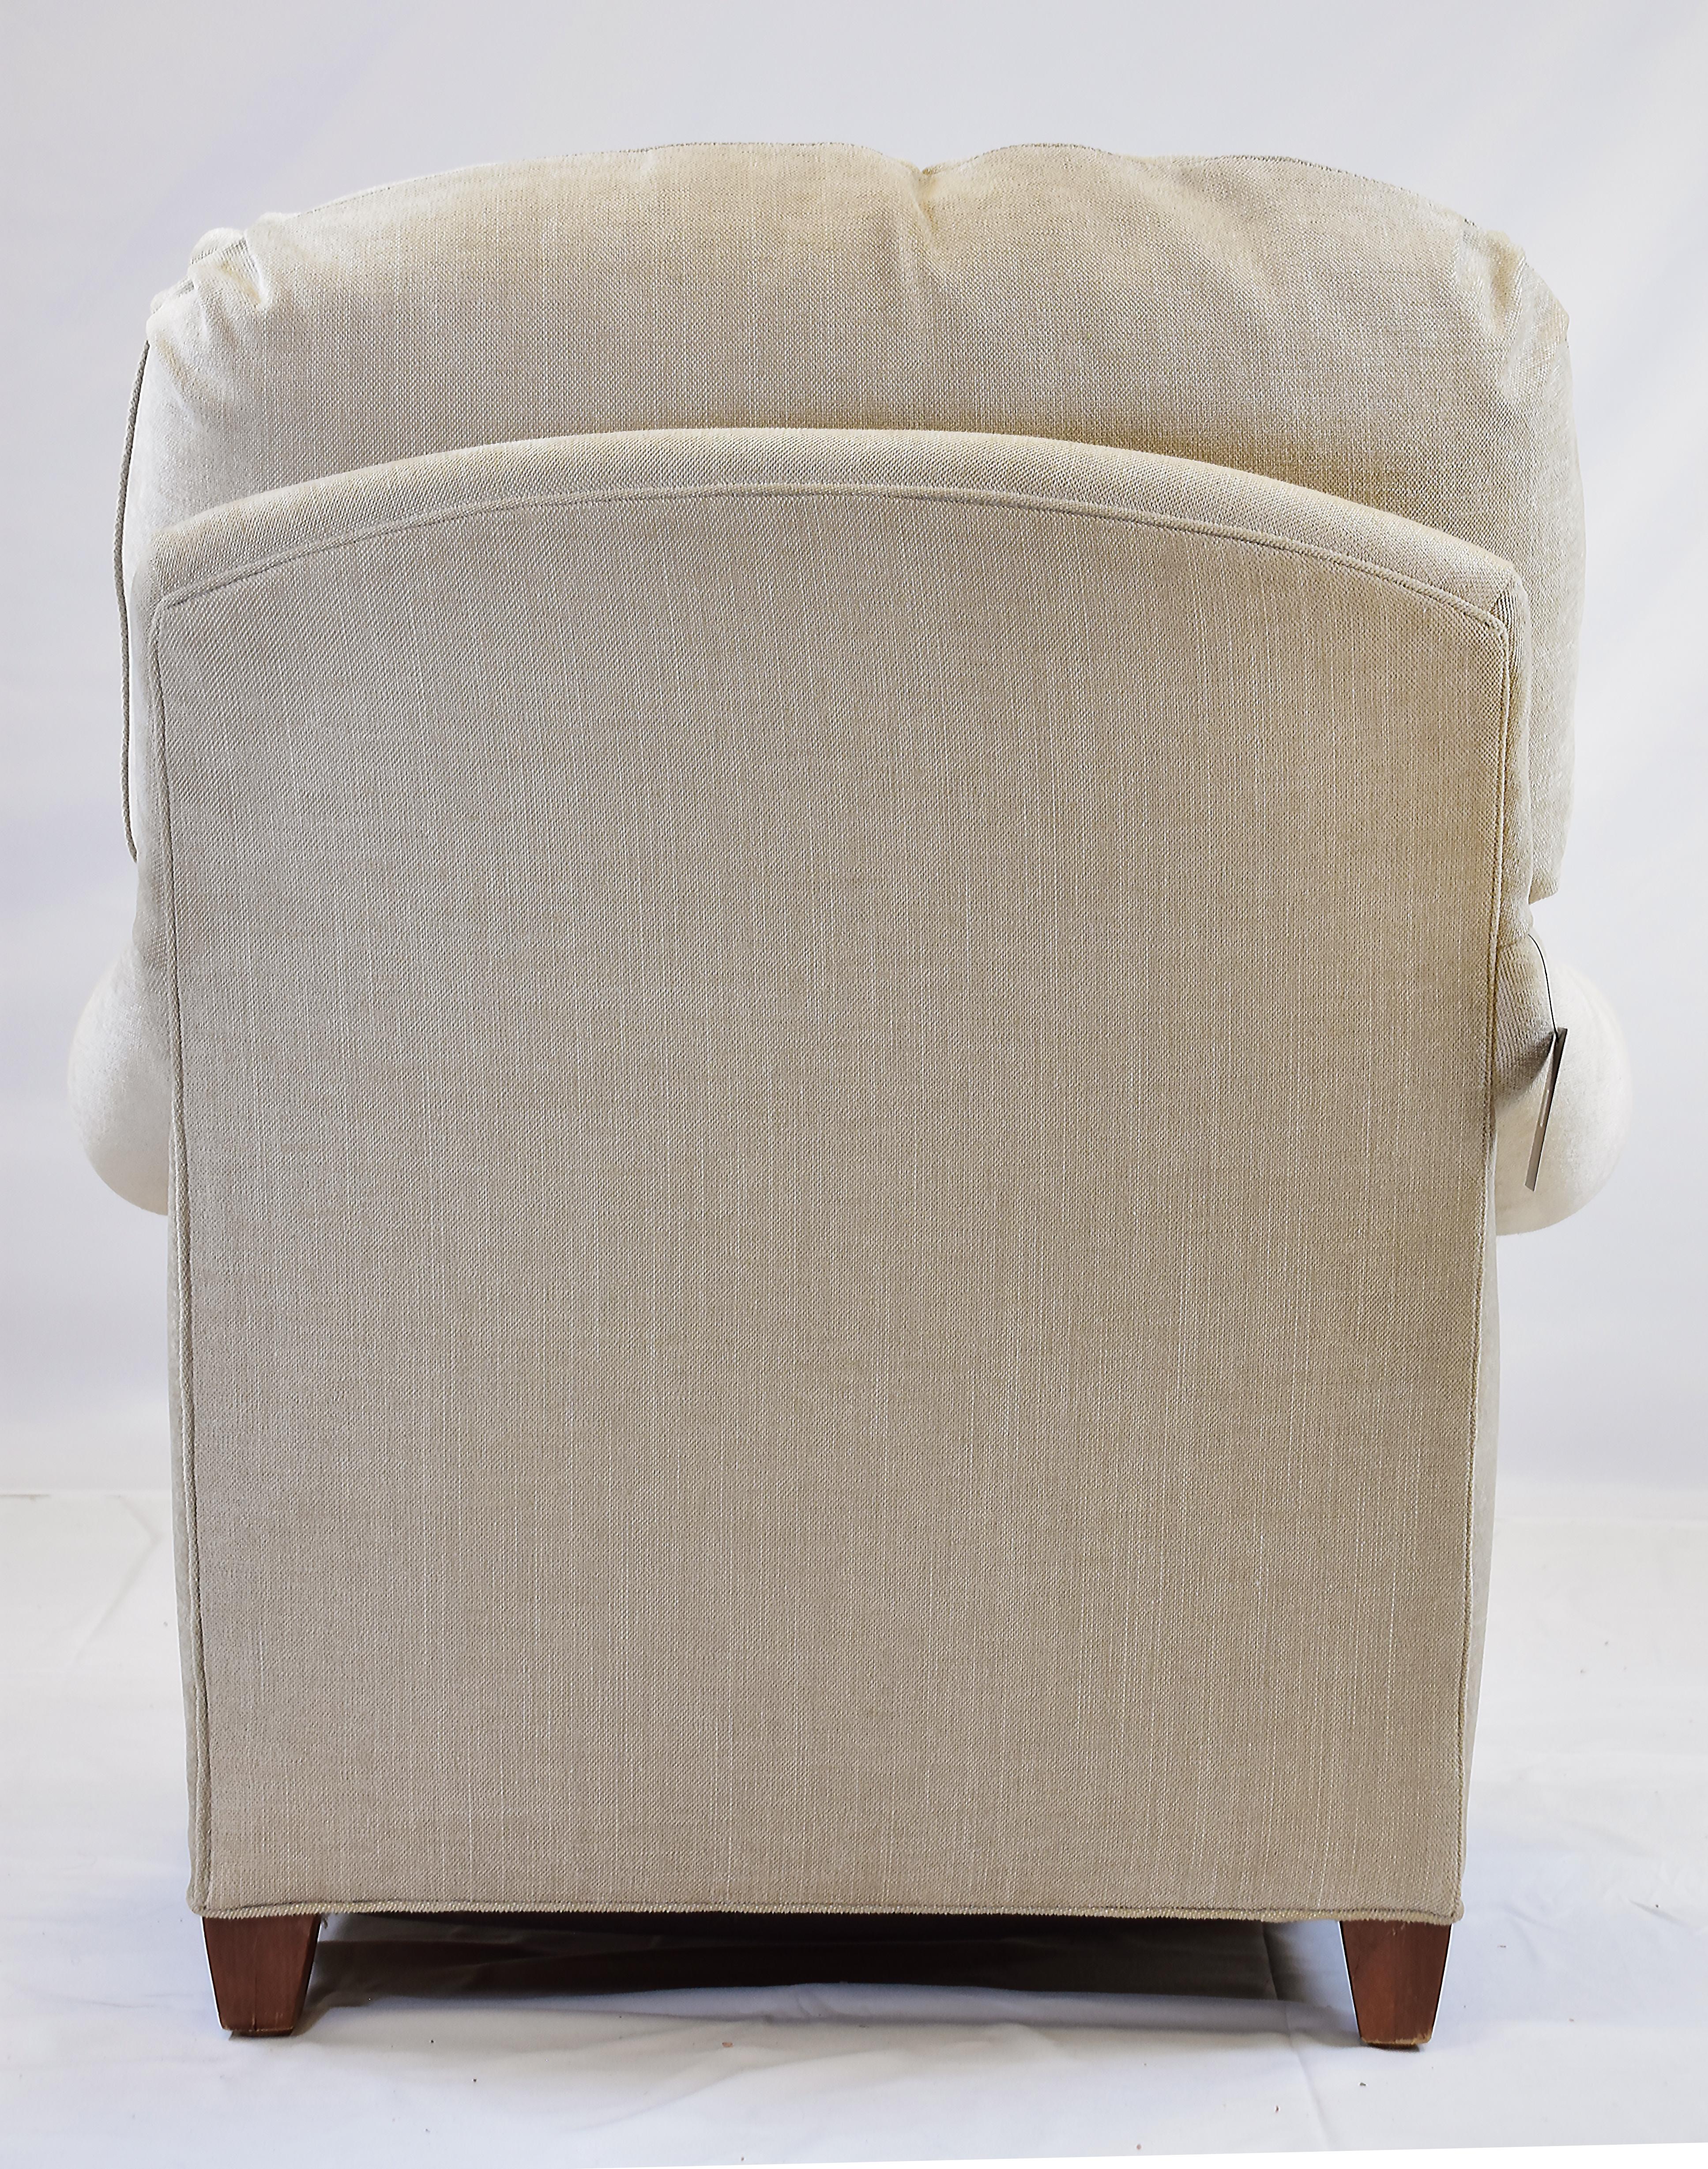 Le Jeune Upholstery Roadster Lounge Chair Showroom Model in Chenille In Good Condition For Sale In Miami, FL